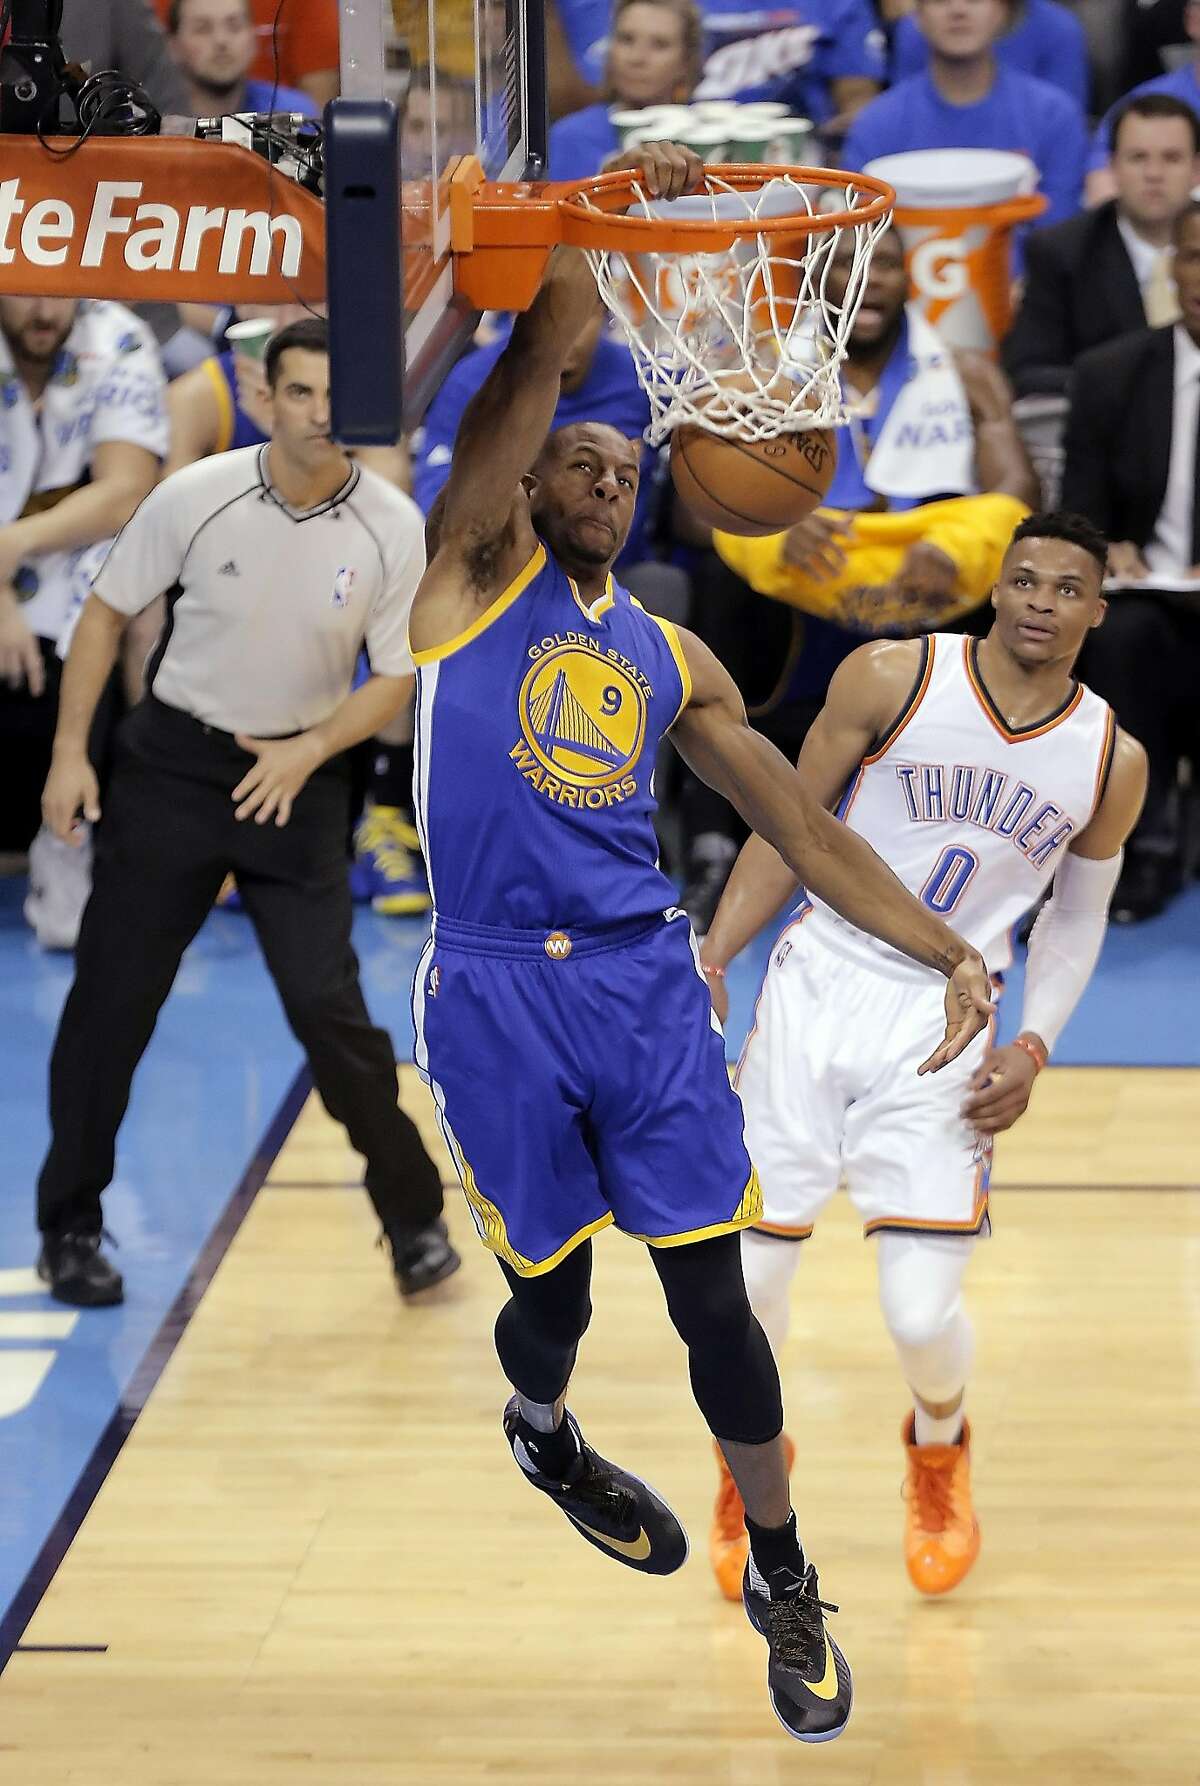 Andre Iguodala (9) dunks during the first half as the Golden State Warriors played the Oklahoma City Thunder in Game 3 of the Western Conference Finals at Chesapeake Energy Arena in Oklahoma City, Okla., on Sunday, May 22, 2016.